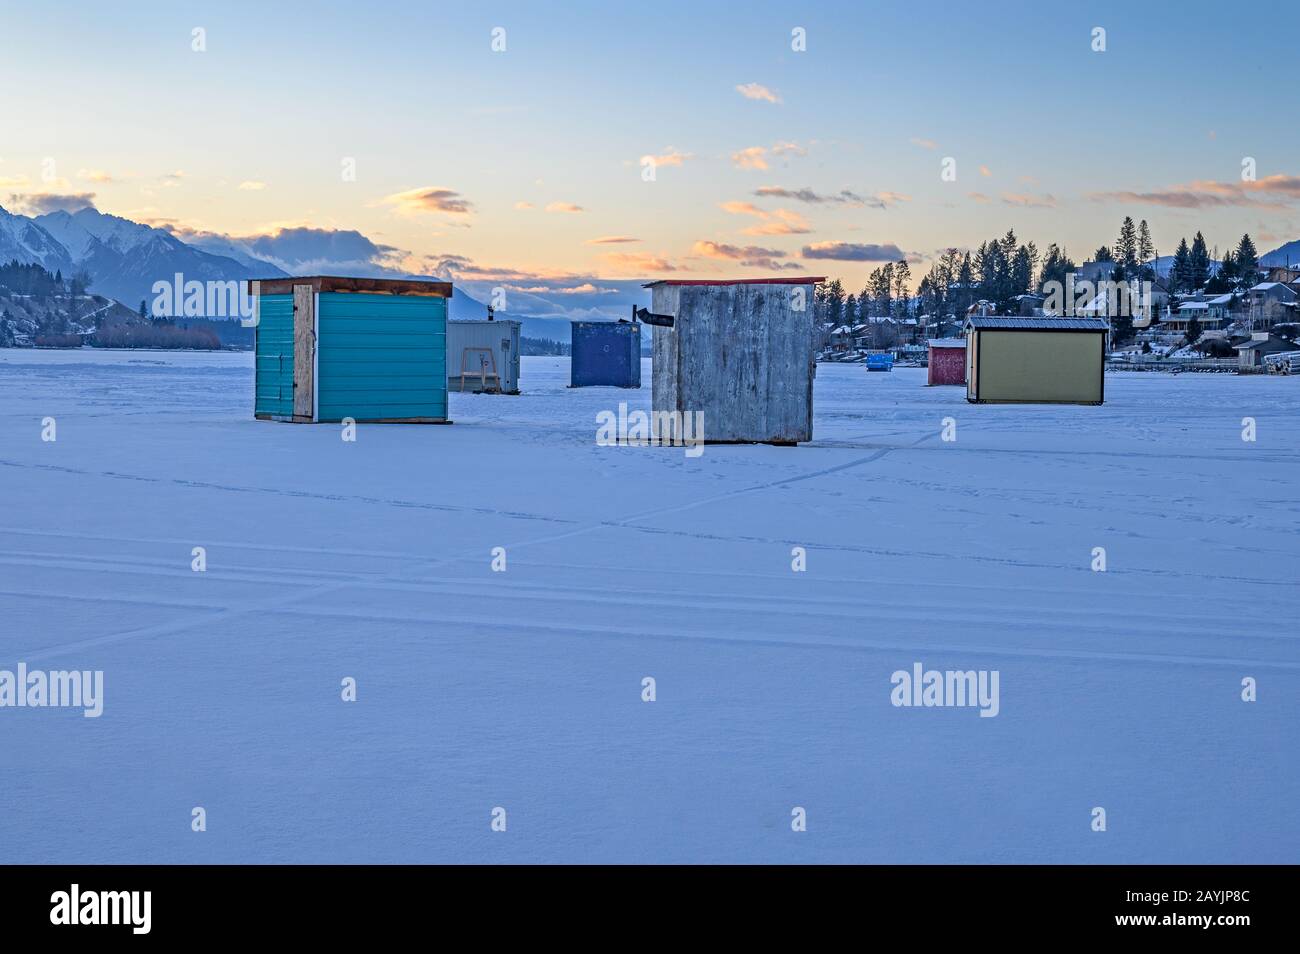 Ice fishing shacks on Lake Windermere at the town of Invermere, British Columbia, Canada Stock Photo